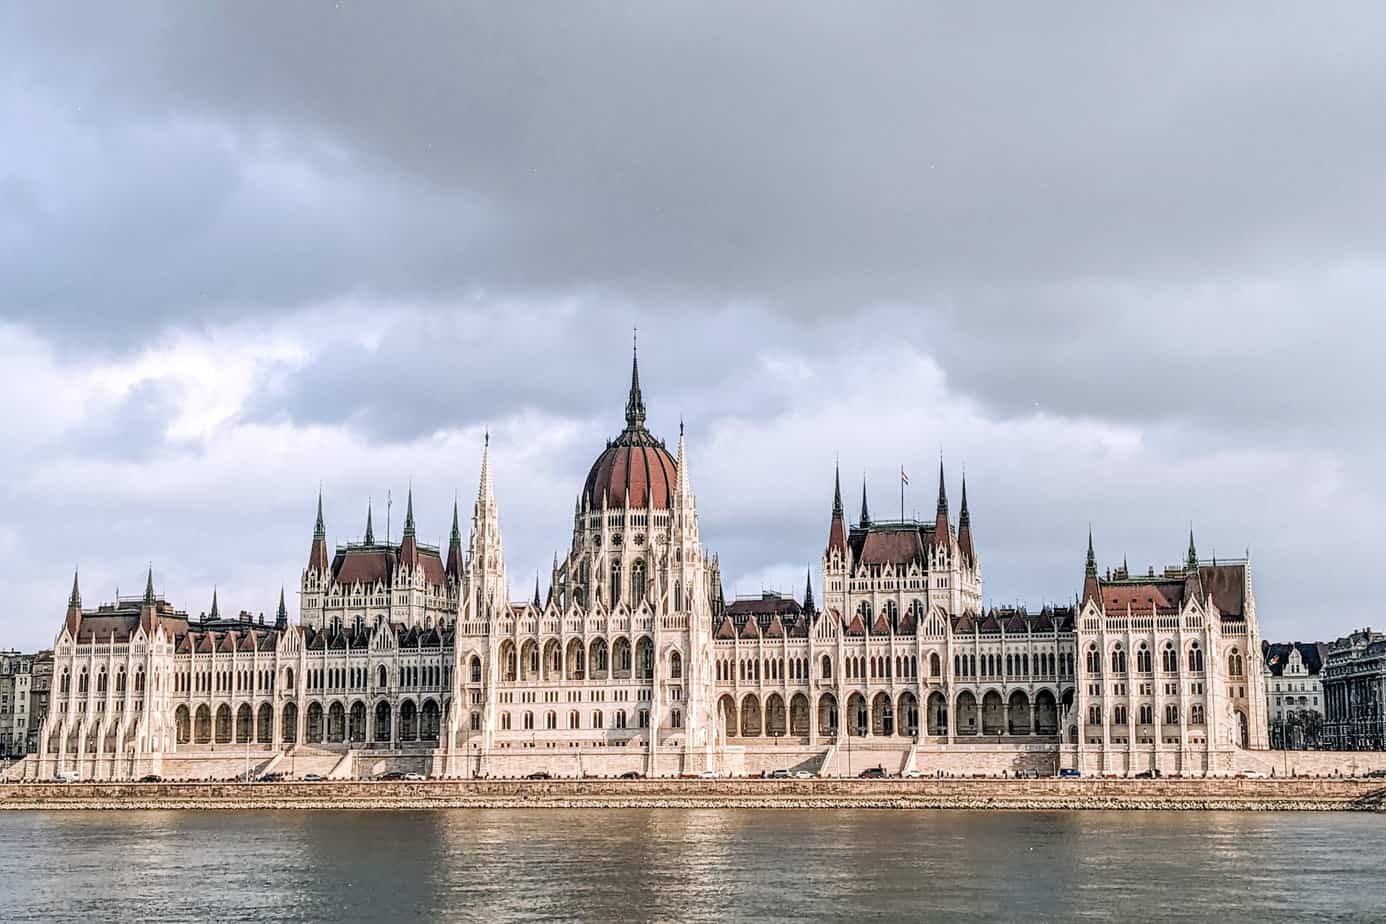 View of Parliament building from the shore across the Danube. The white building with it's red roof towers above the water.